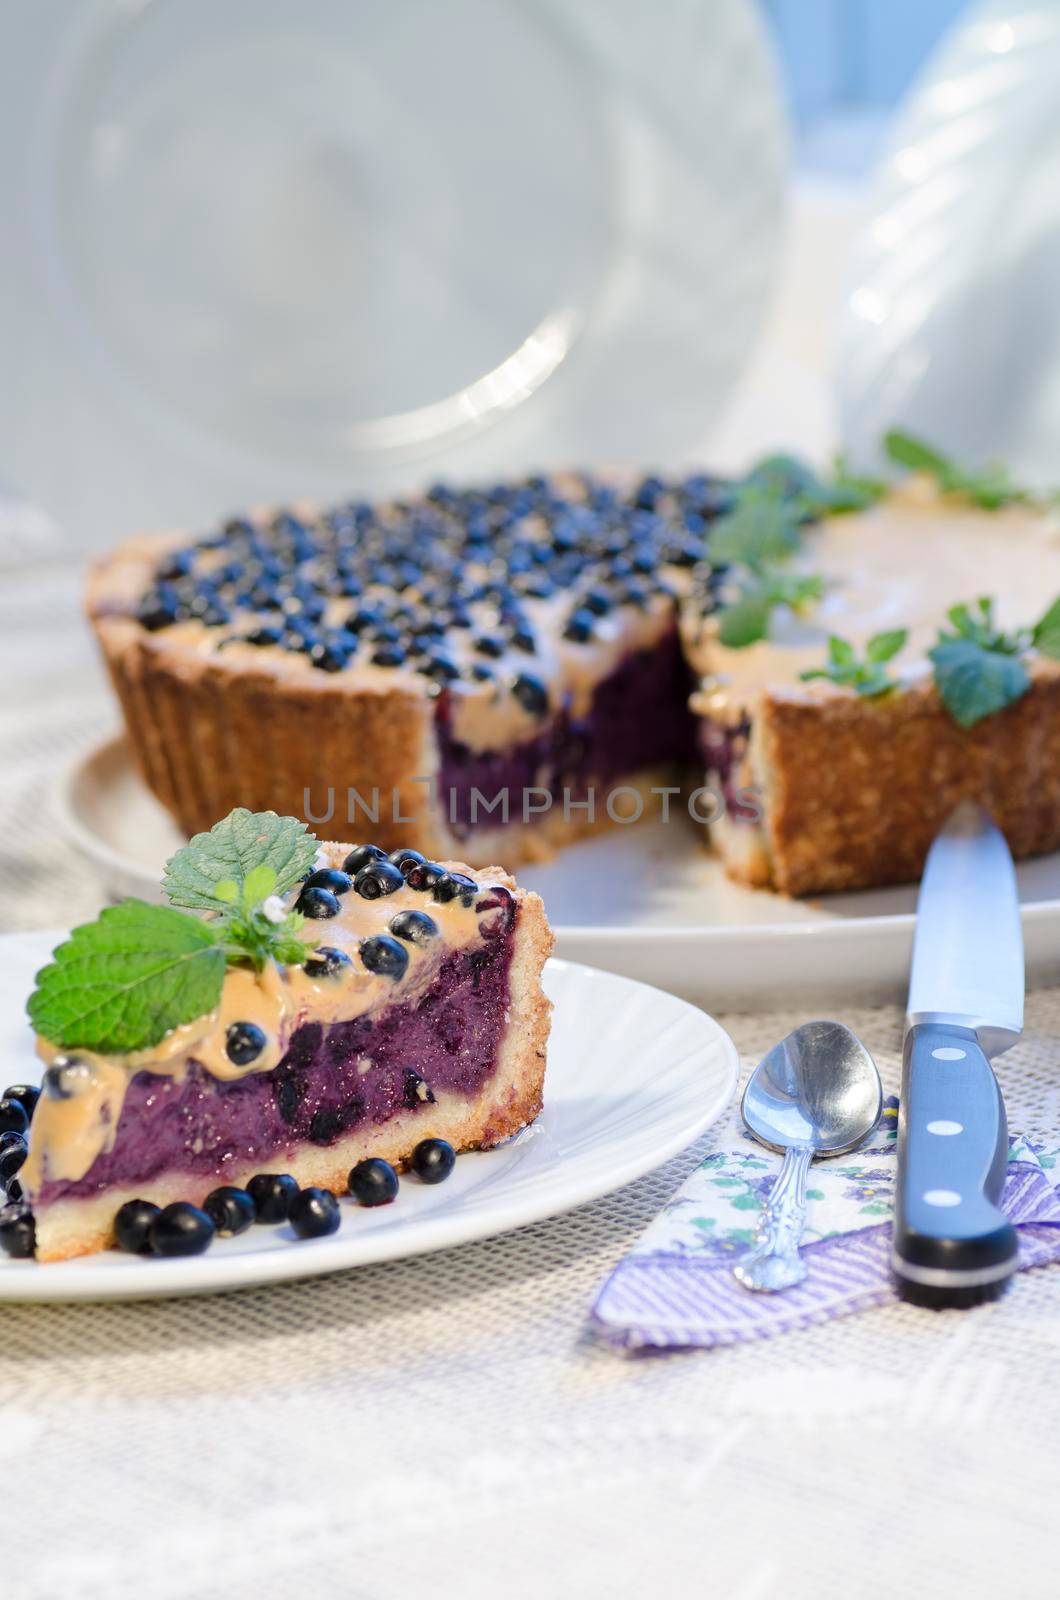 Blueberry pie with mint and sweetened condensed milk. From series "Tart with blueberry and condensed milk"